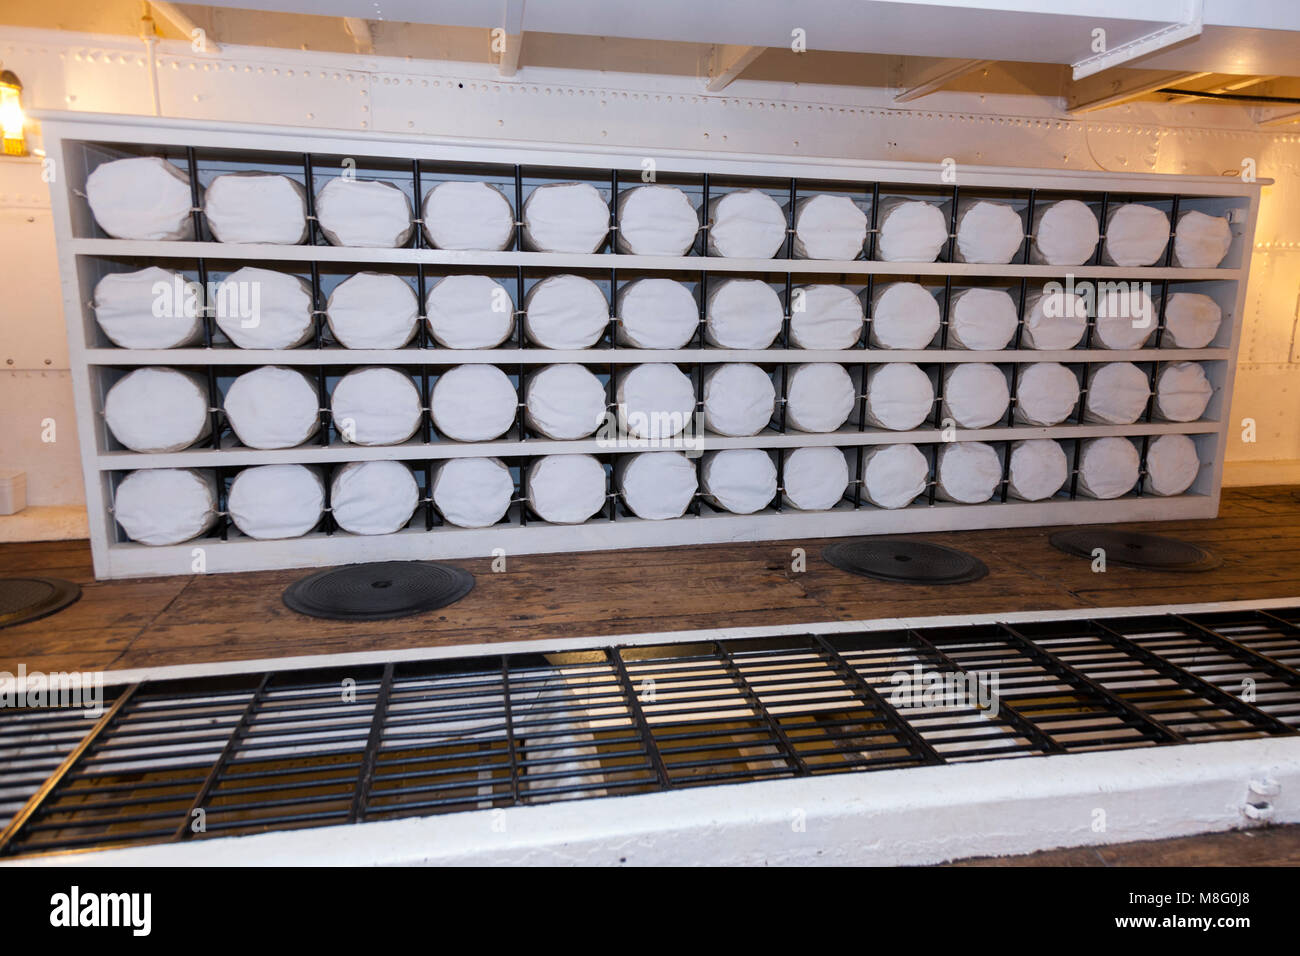 Storage for sailors' kit bags / kitbags with each bag containing belongings of a seaman, on lower deck of HMS Warrior. Portsmouth Historic Dockyard UK Stock Photo